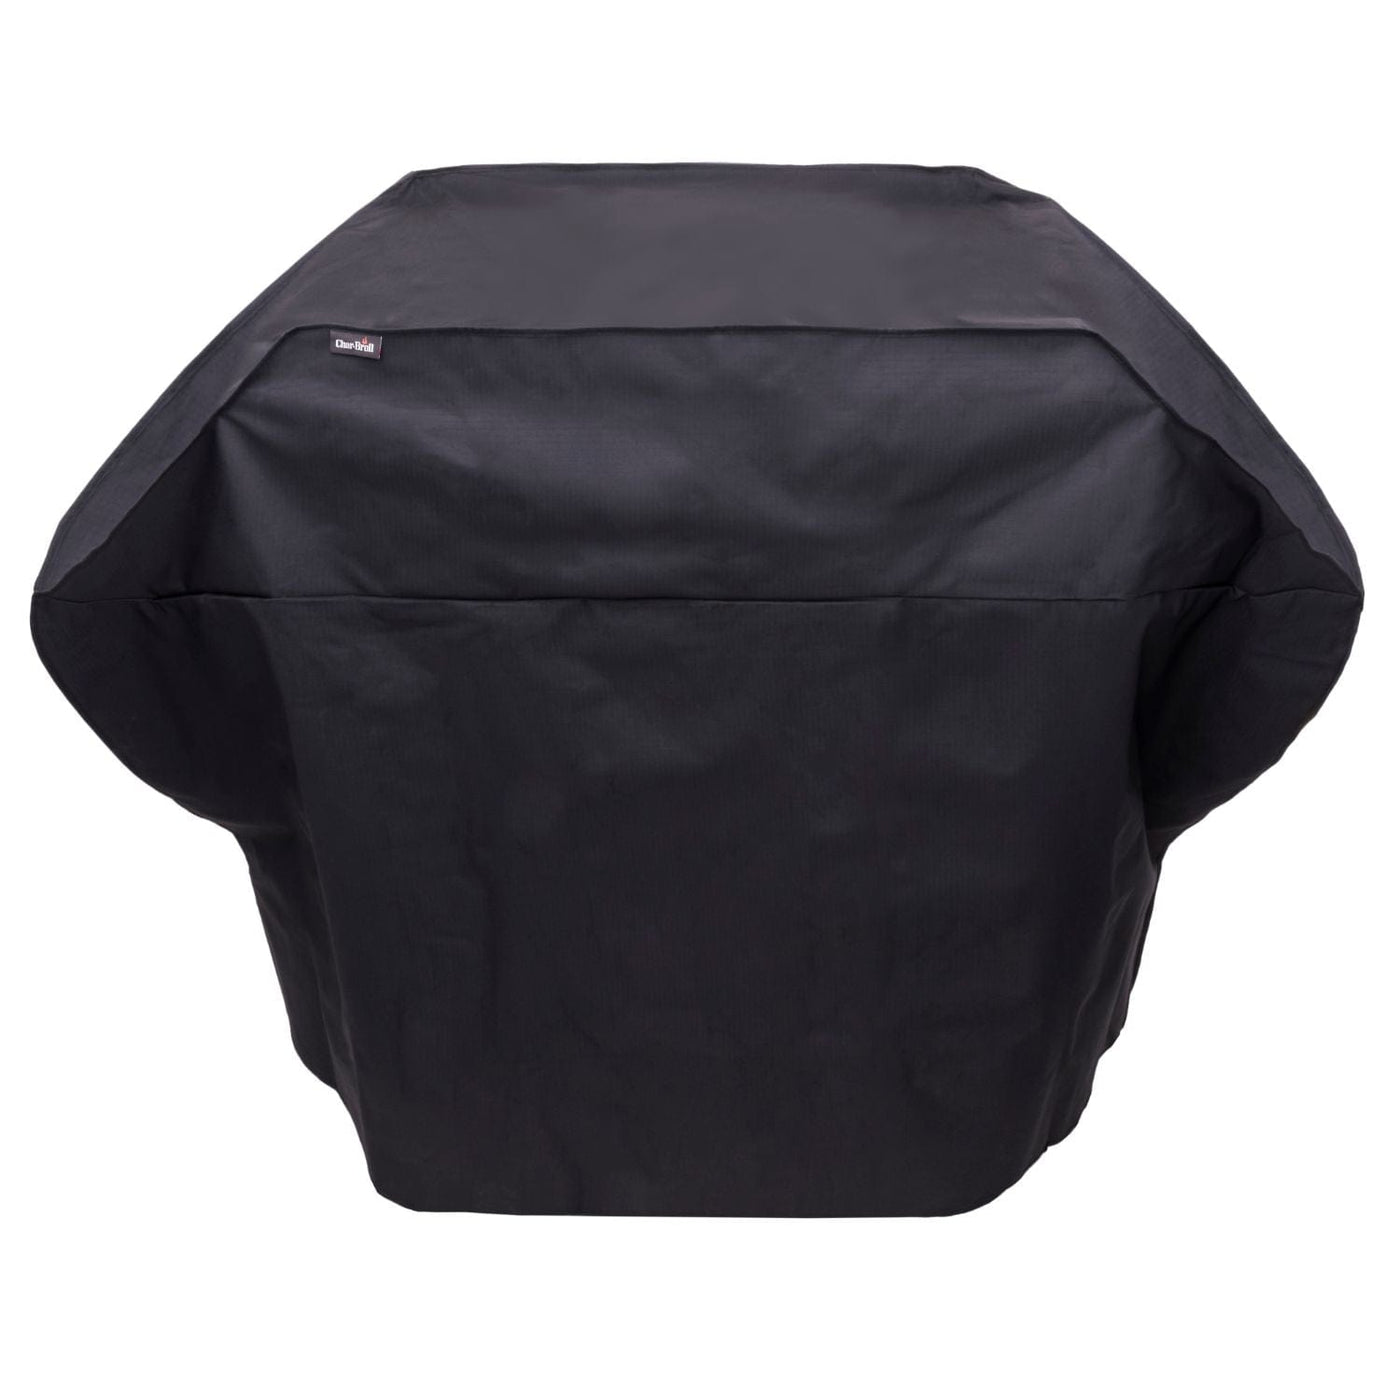 Char-Broil Char-Broil Large 3-4 Burner Rip-Stop Grill Cover Camping And Outdoor